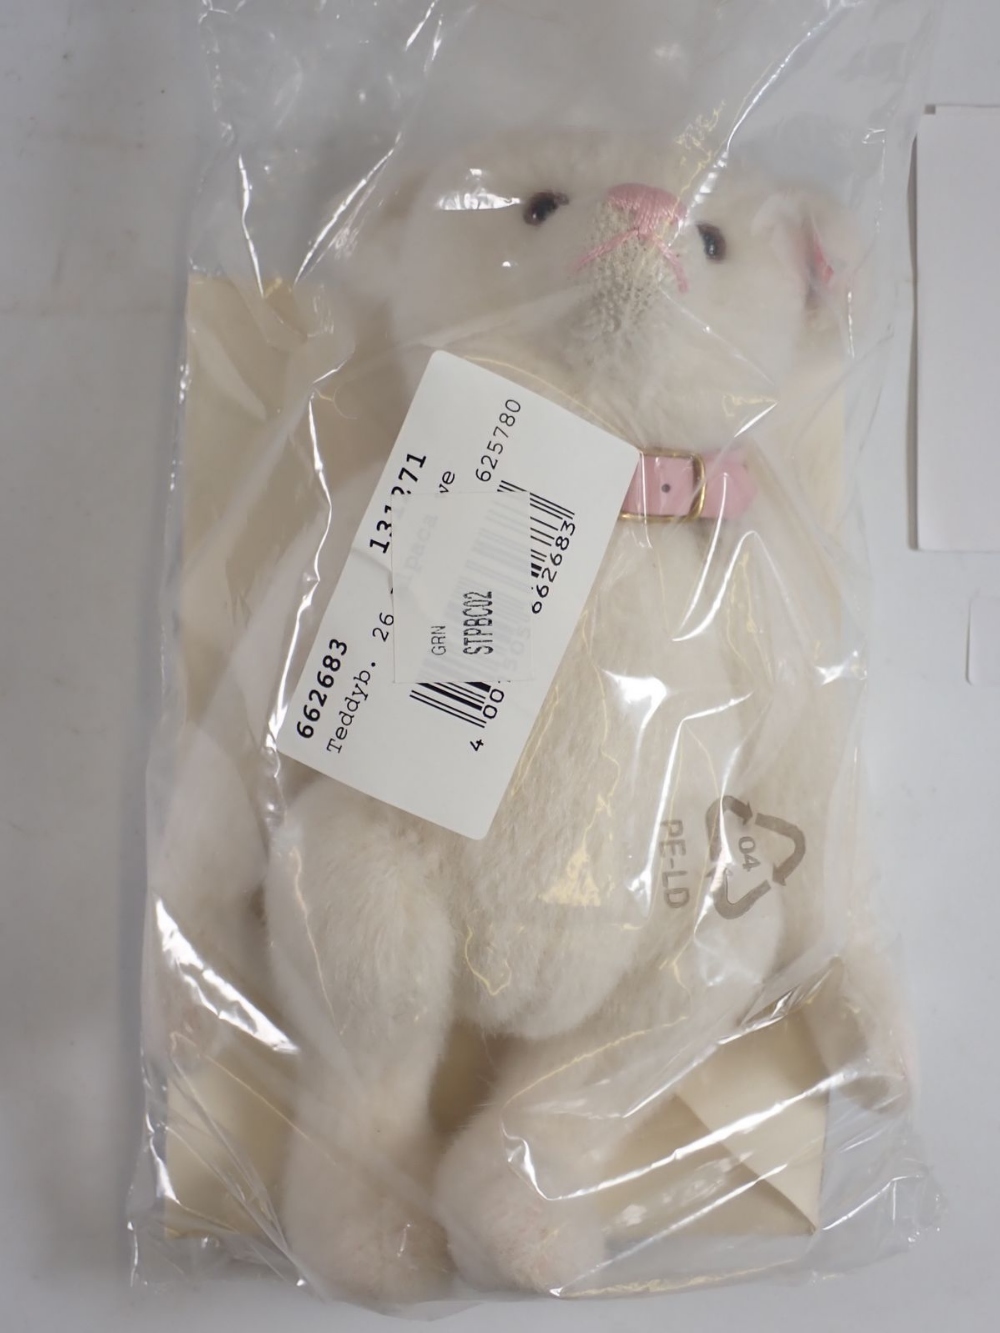 A Steiff limited edition white Alpaca bear Jill with box and certificate, sealed in bag - Image 2 of 2